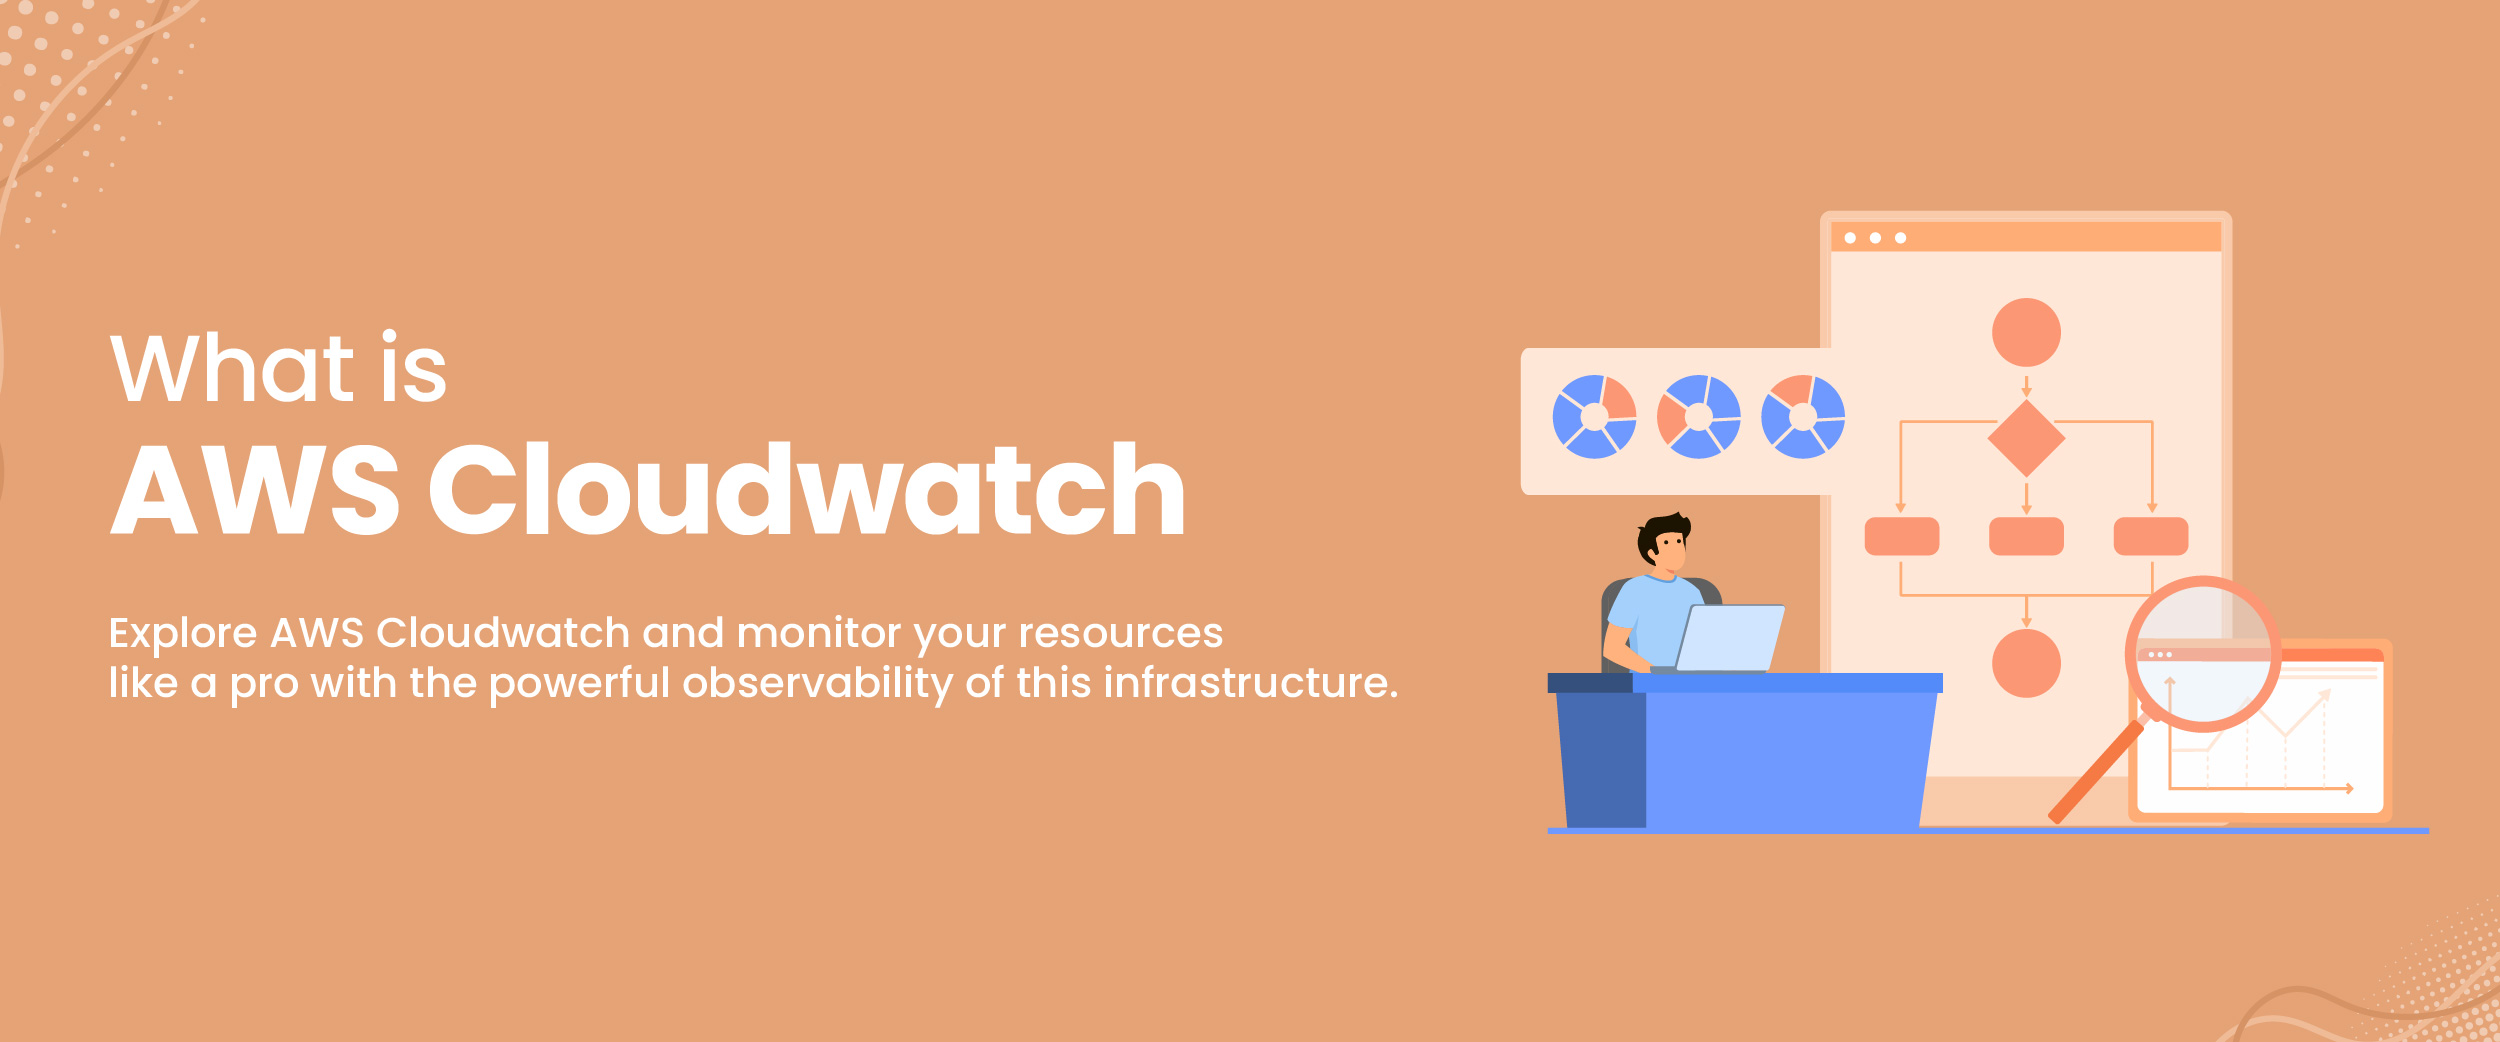 what is AWS cloudwatch